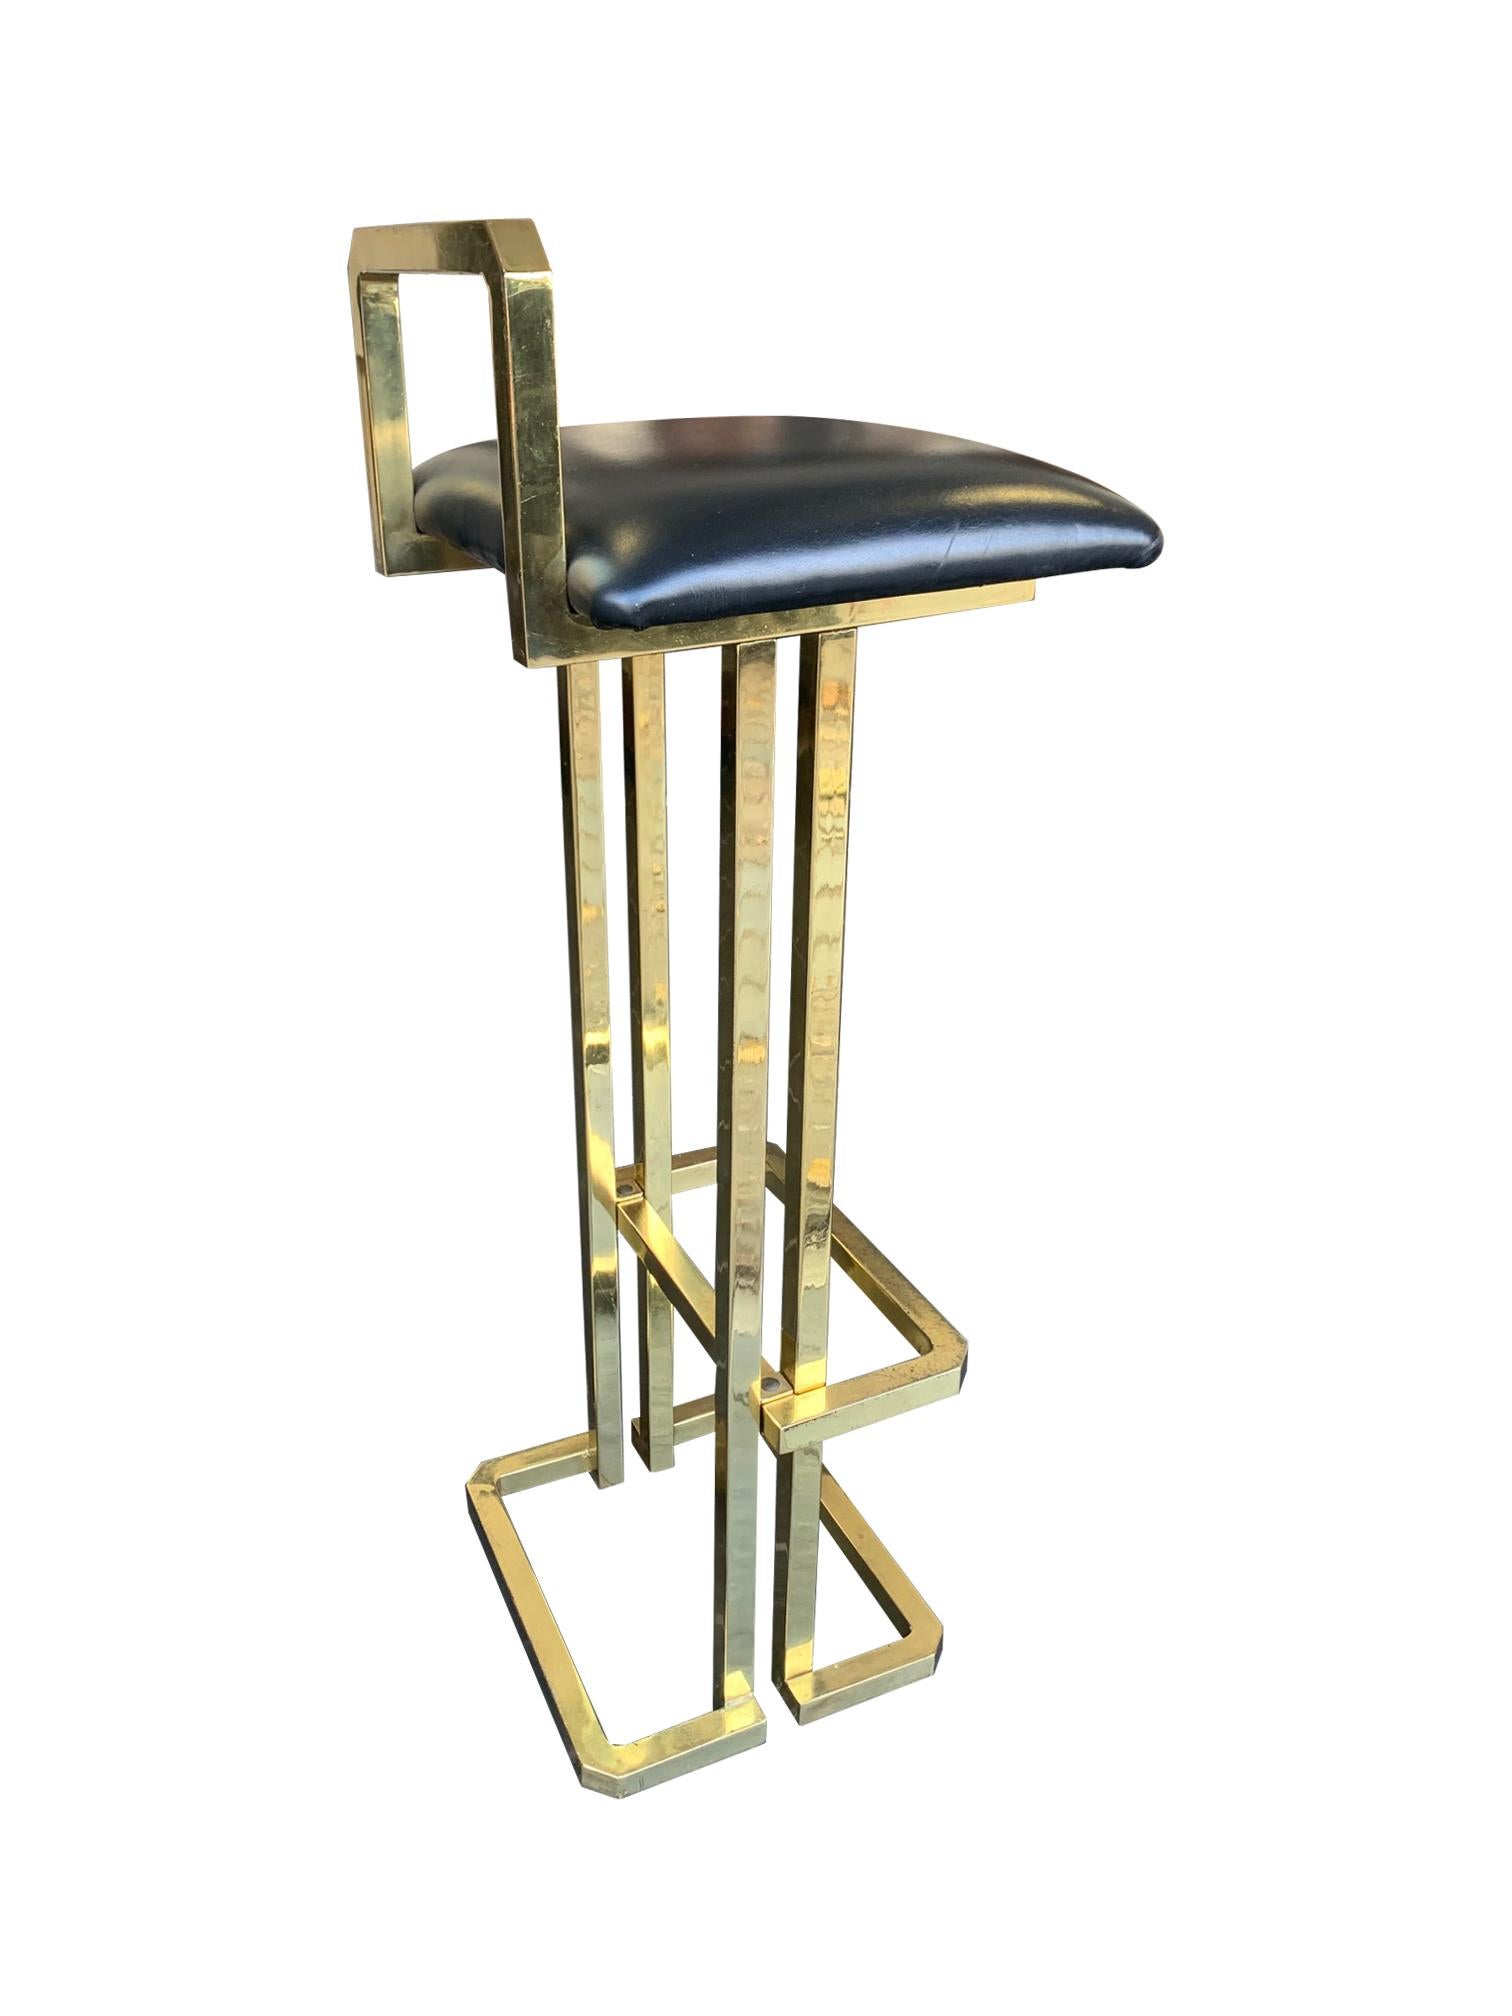 Set of 3 Maison Jansen Style Gilt Metal Stools with Black Leather Seat Pads For Sale 4